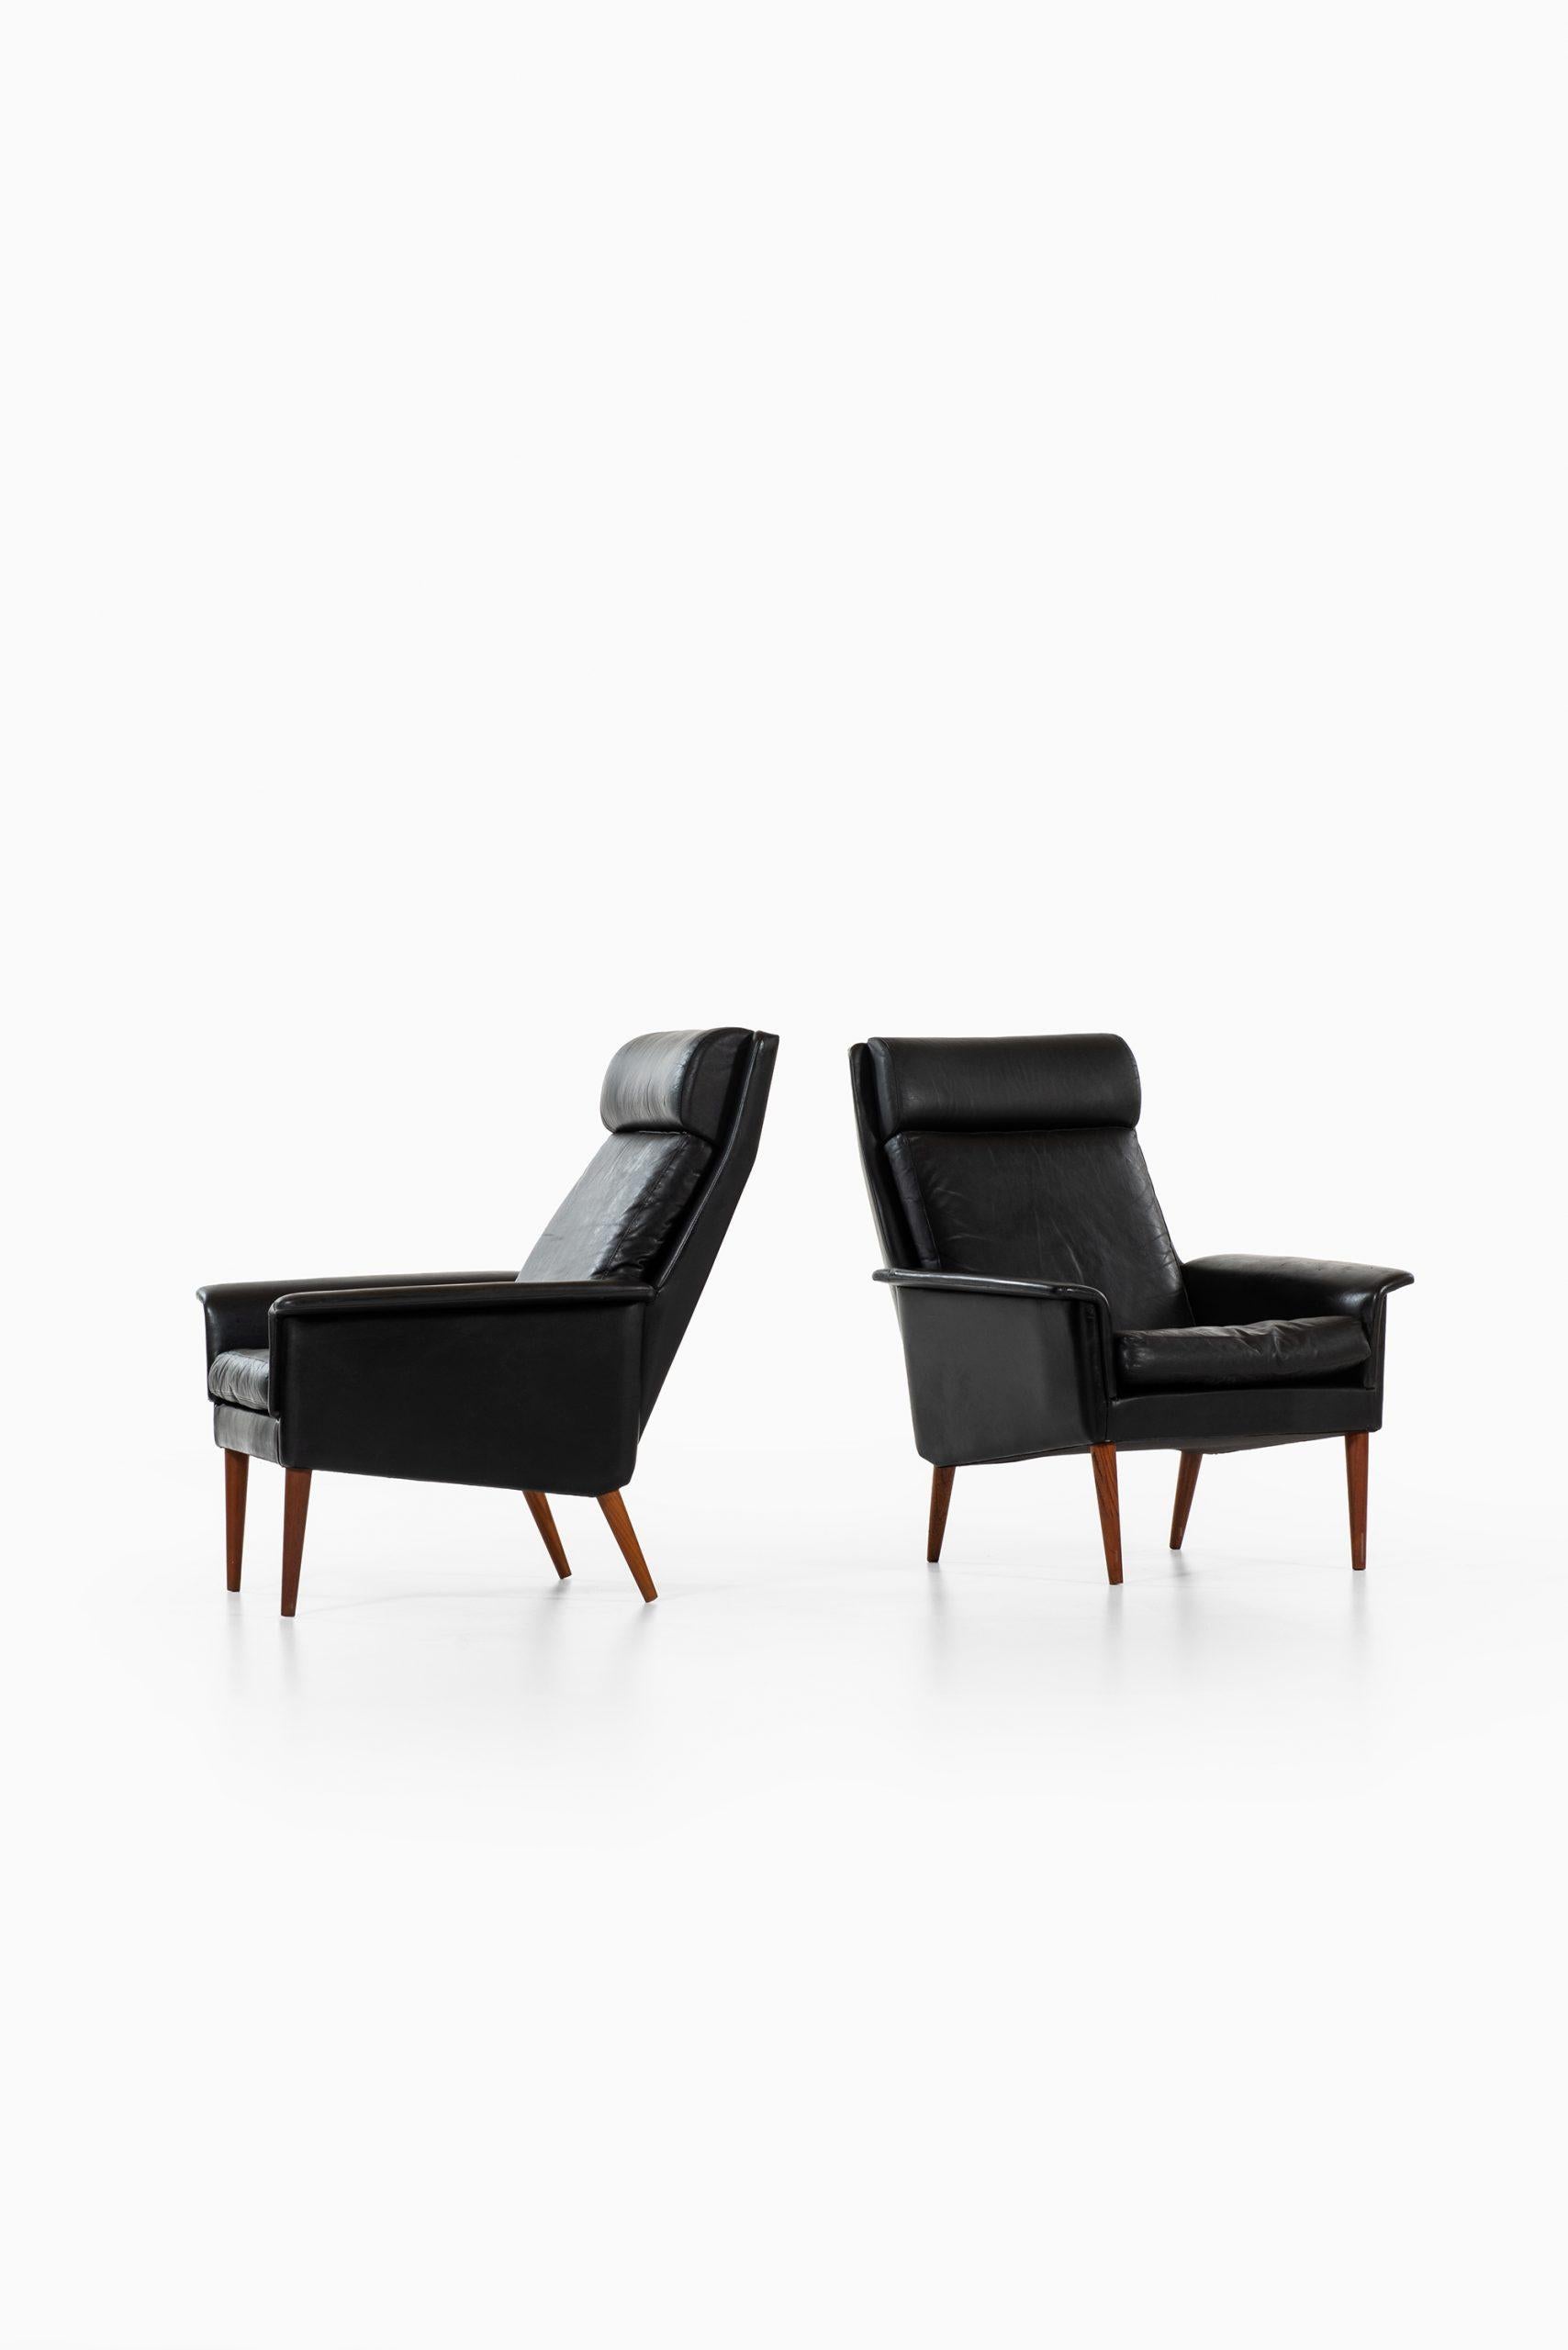 A pair of easy chairs by unknown designer. Produced in Denmark.